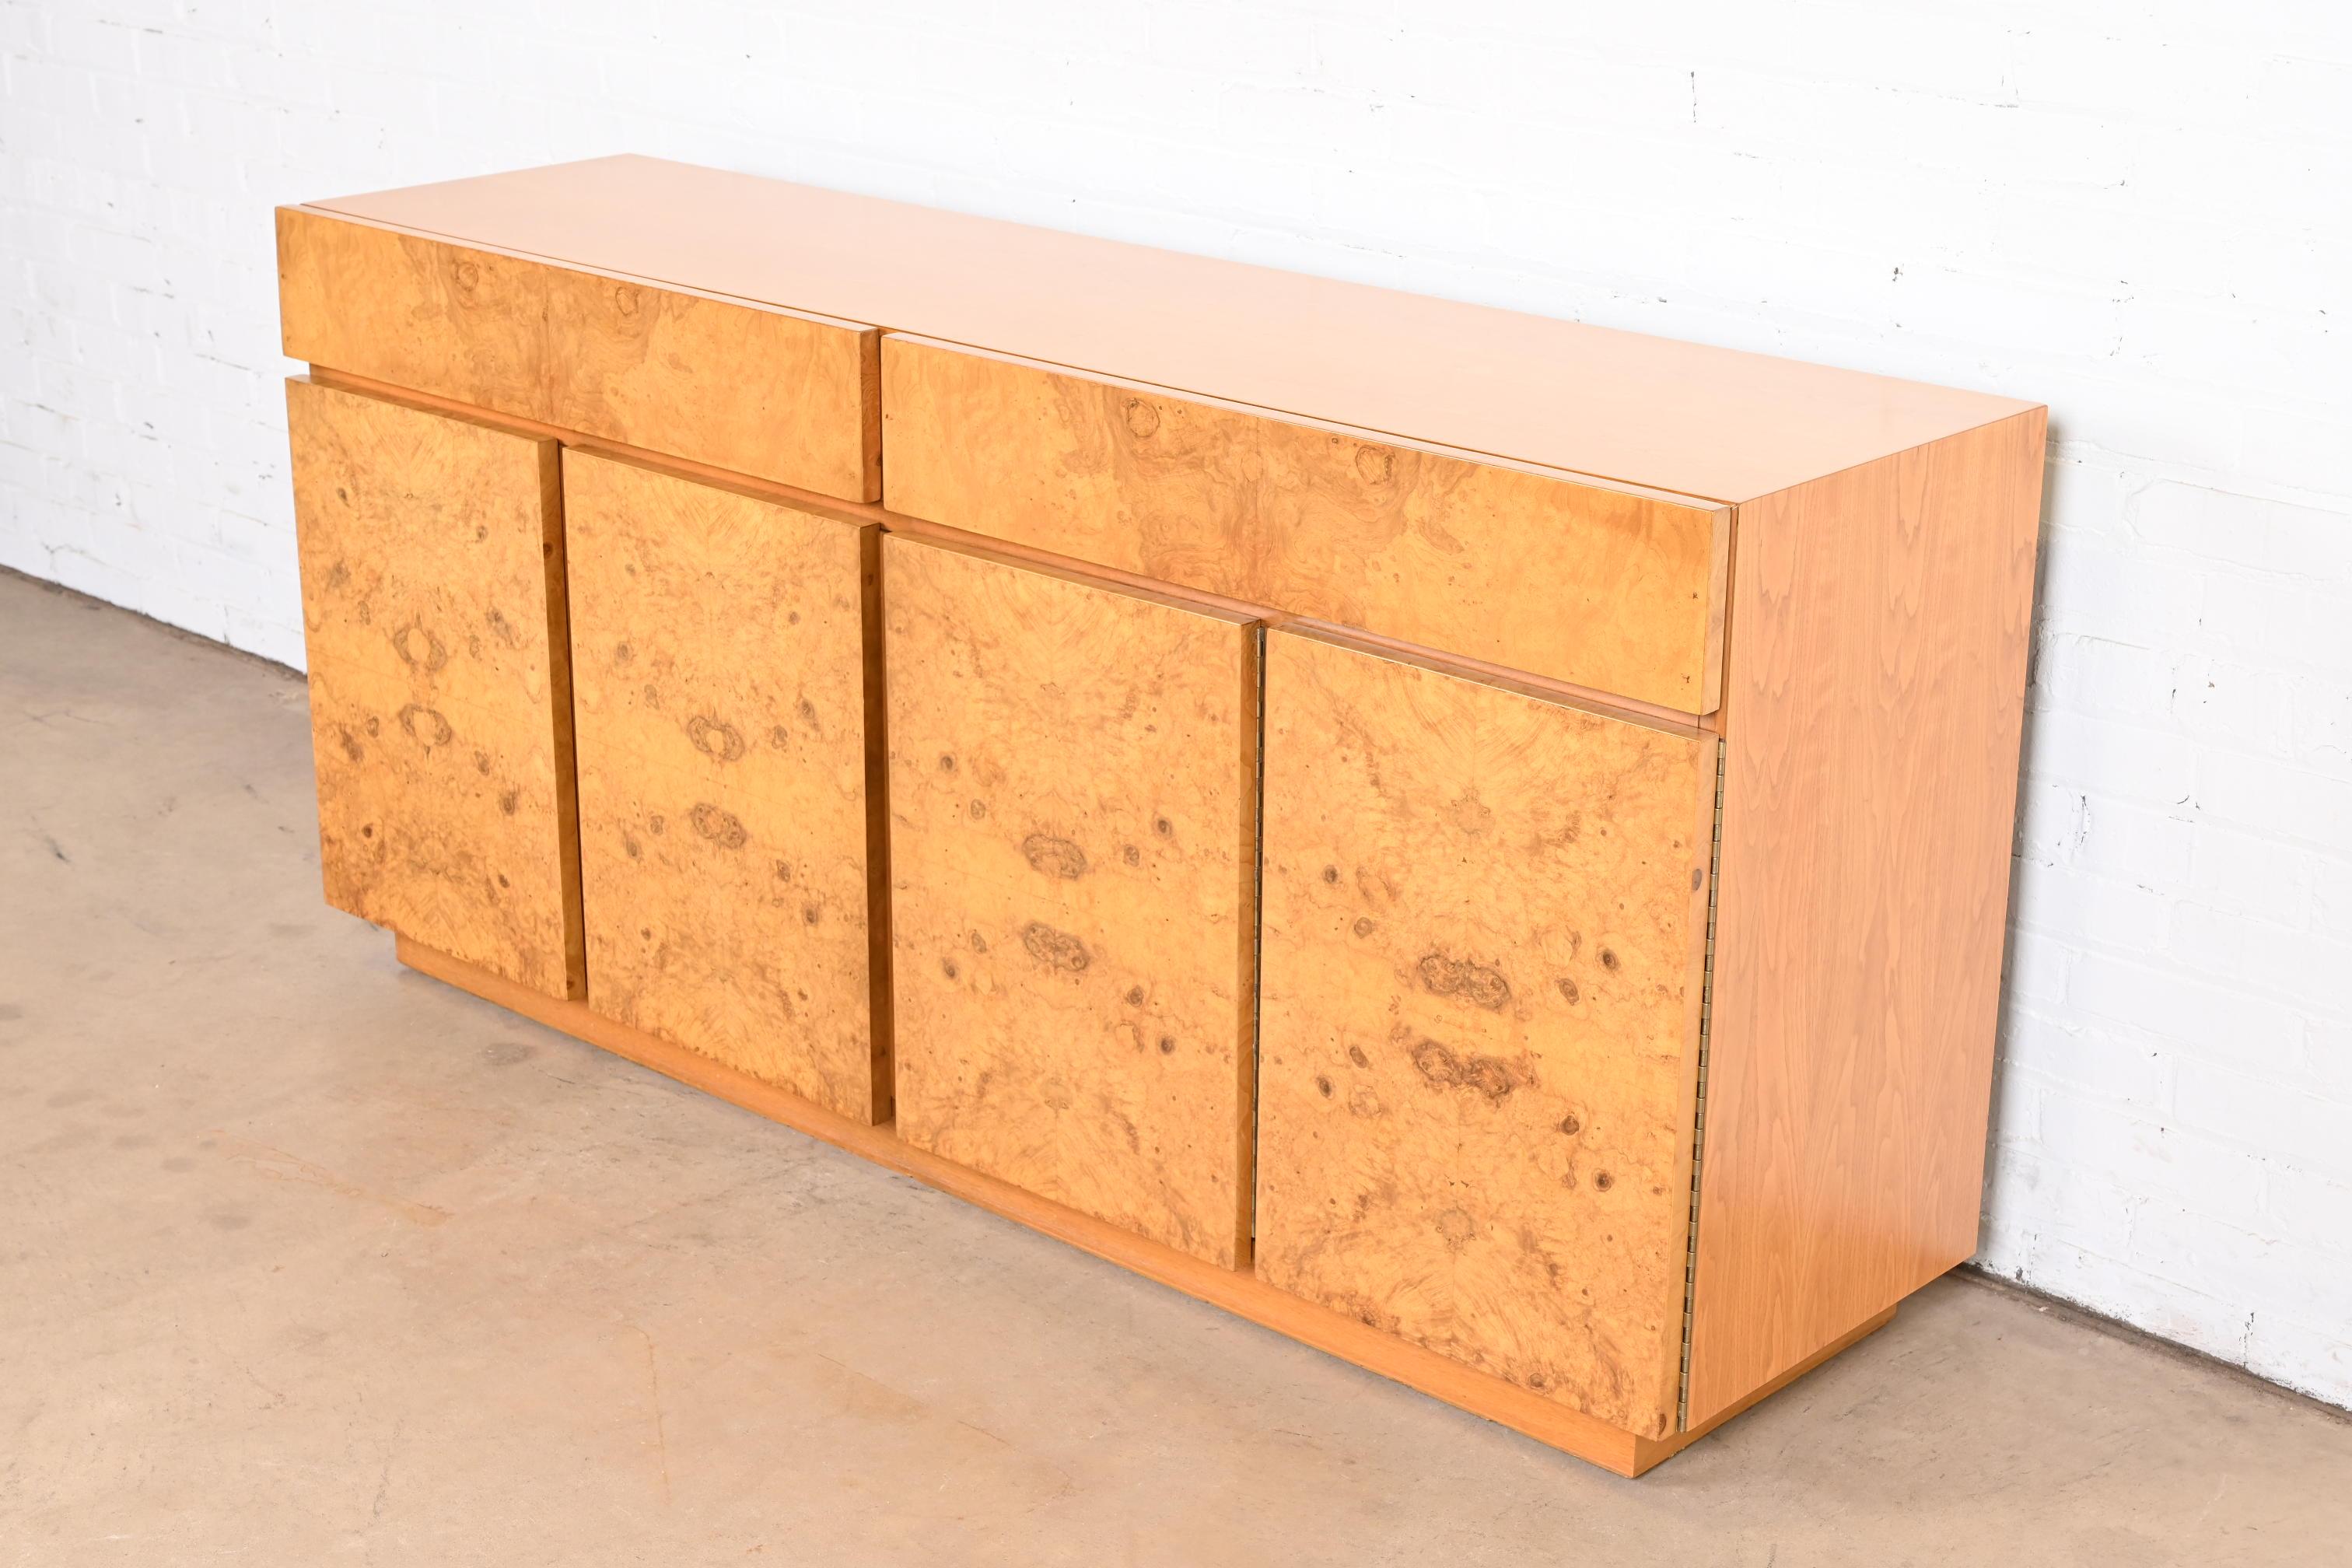 Milo Baughman Style Burl Wood Sideboard, Credenza, or Bar Cabinet, Refinished In Good Condition For Sale In South Bend, IN